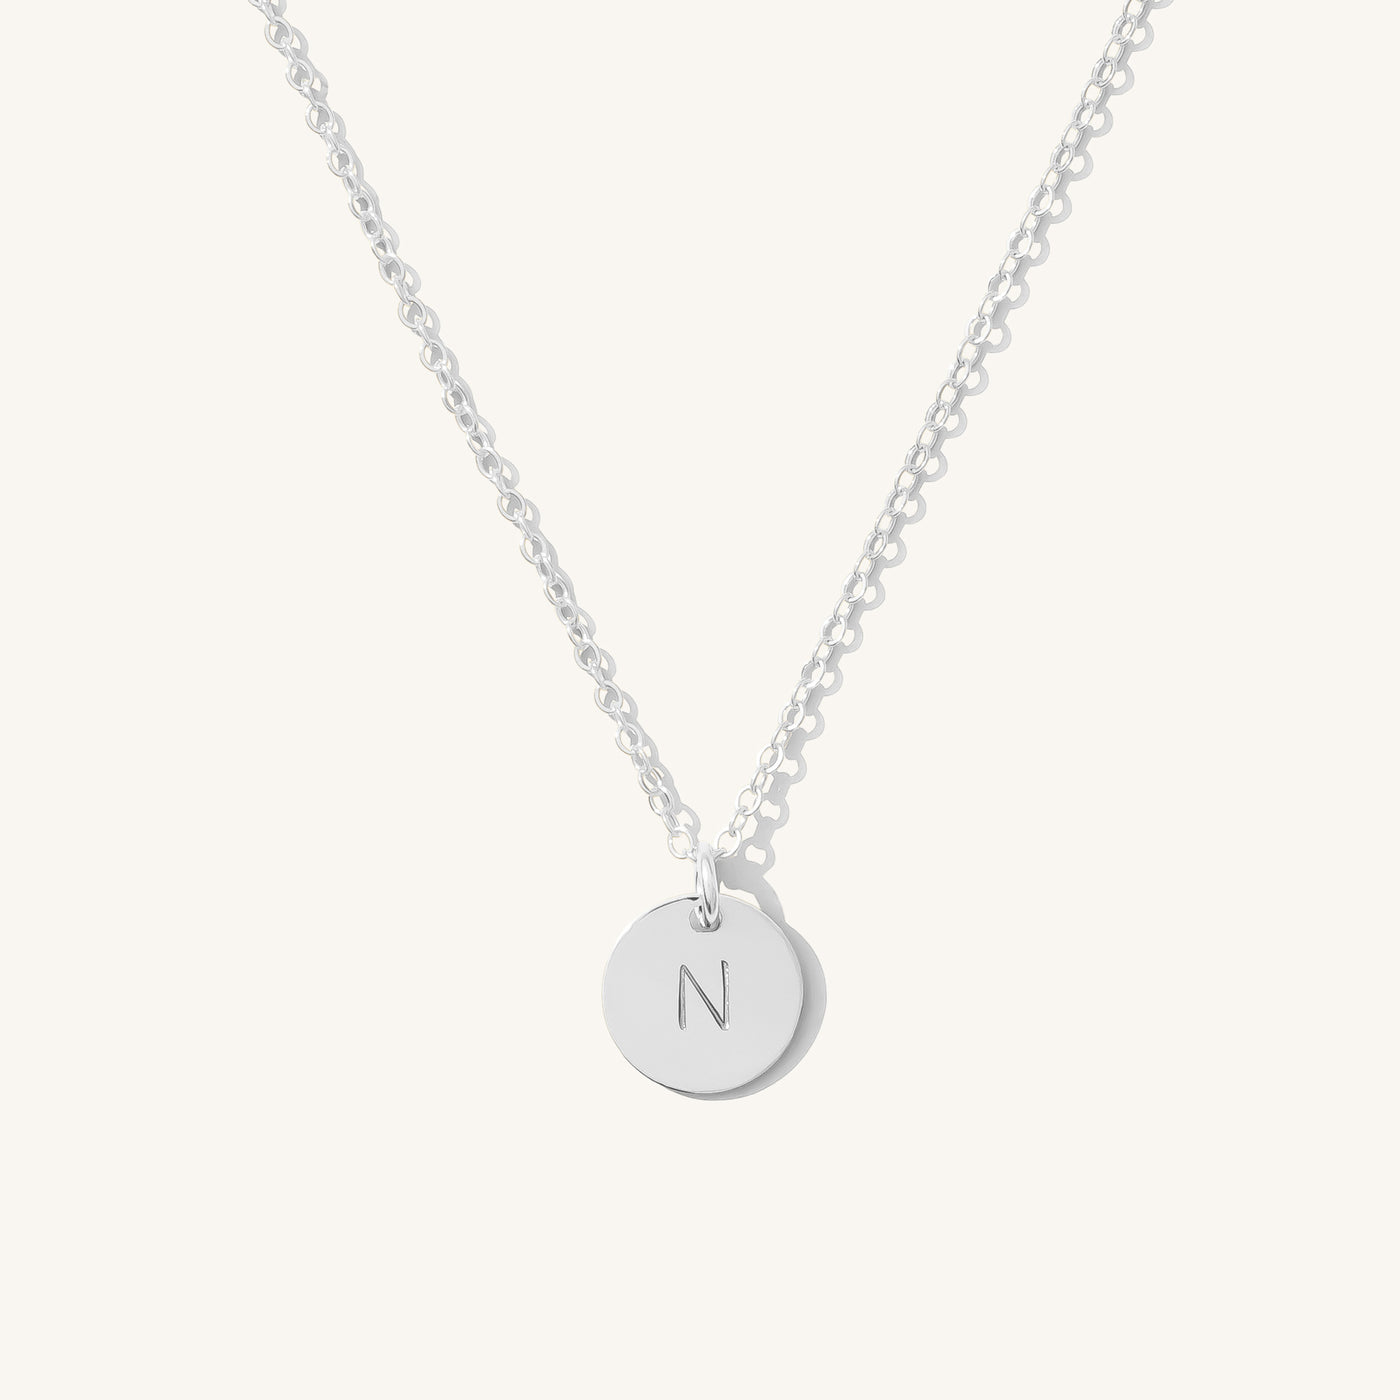 N Dainty Initial Necklace